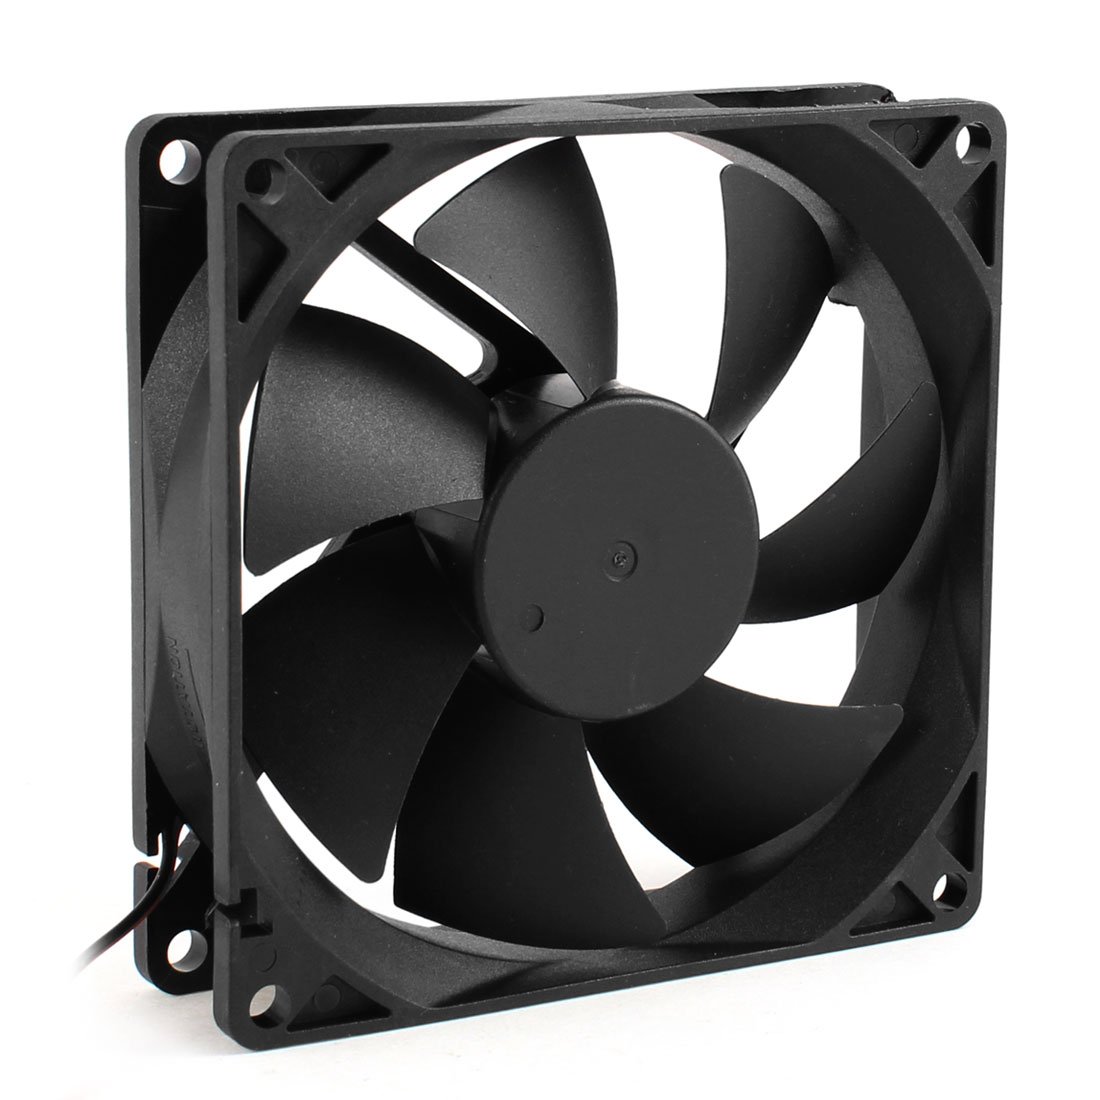 PROMOTION! Hot 92mm x 25mm 24V 2Pin Sleeve Bearing Cooling Fan for PC Case CPU Cooler